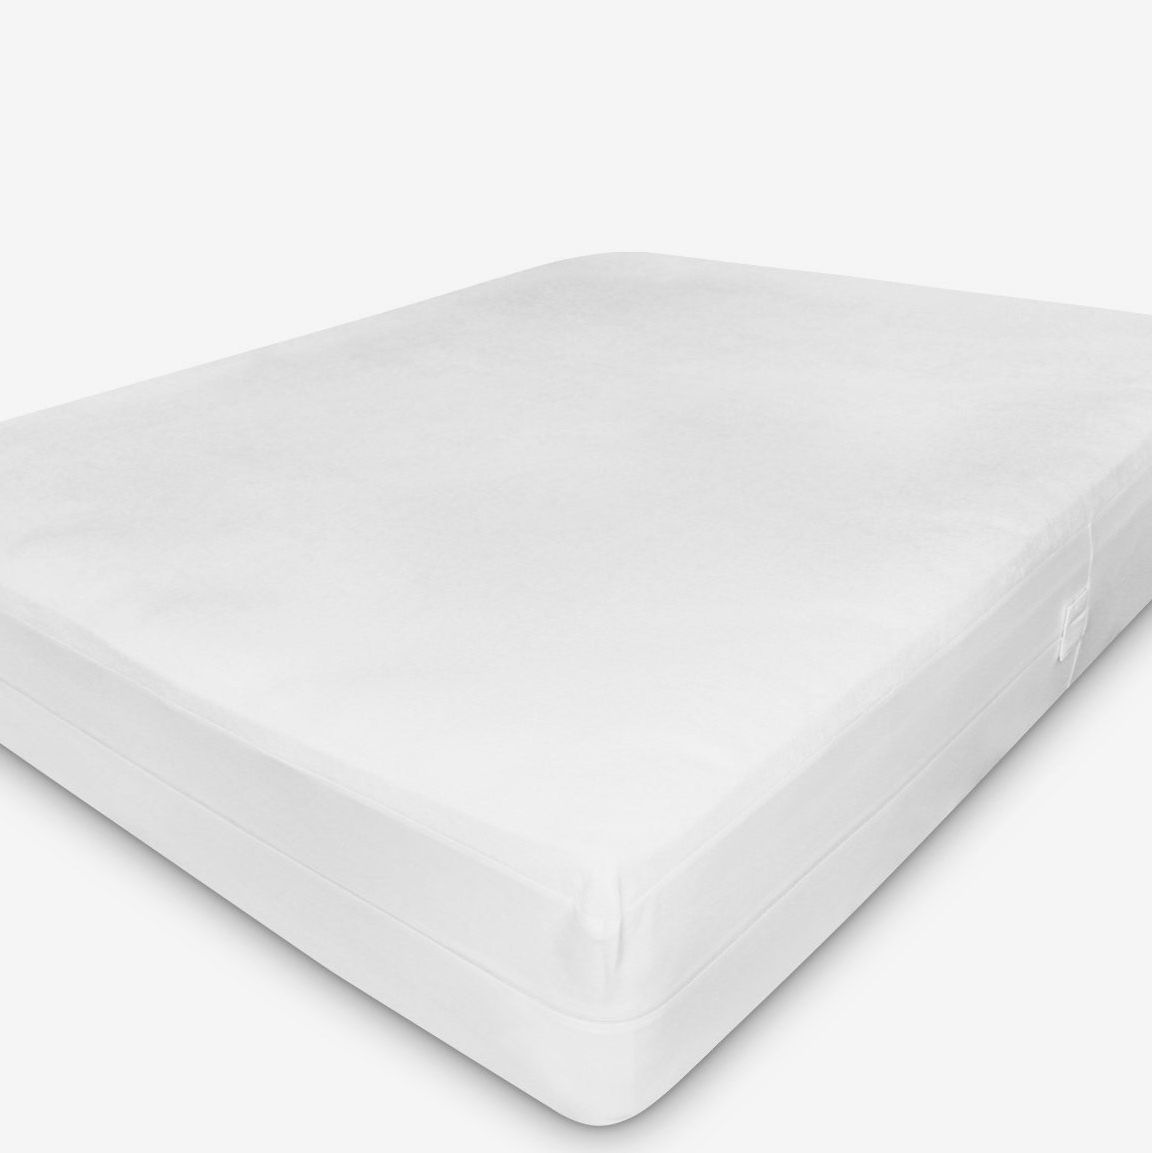 15 Best Mattress Protectors 2021 The, Plastic Mattress Cover King Size Bed